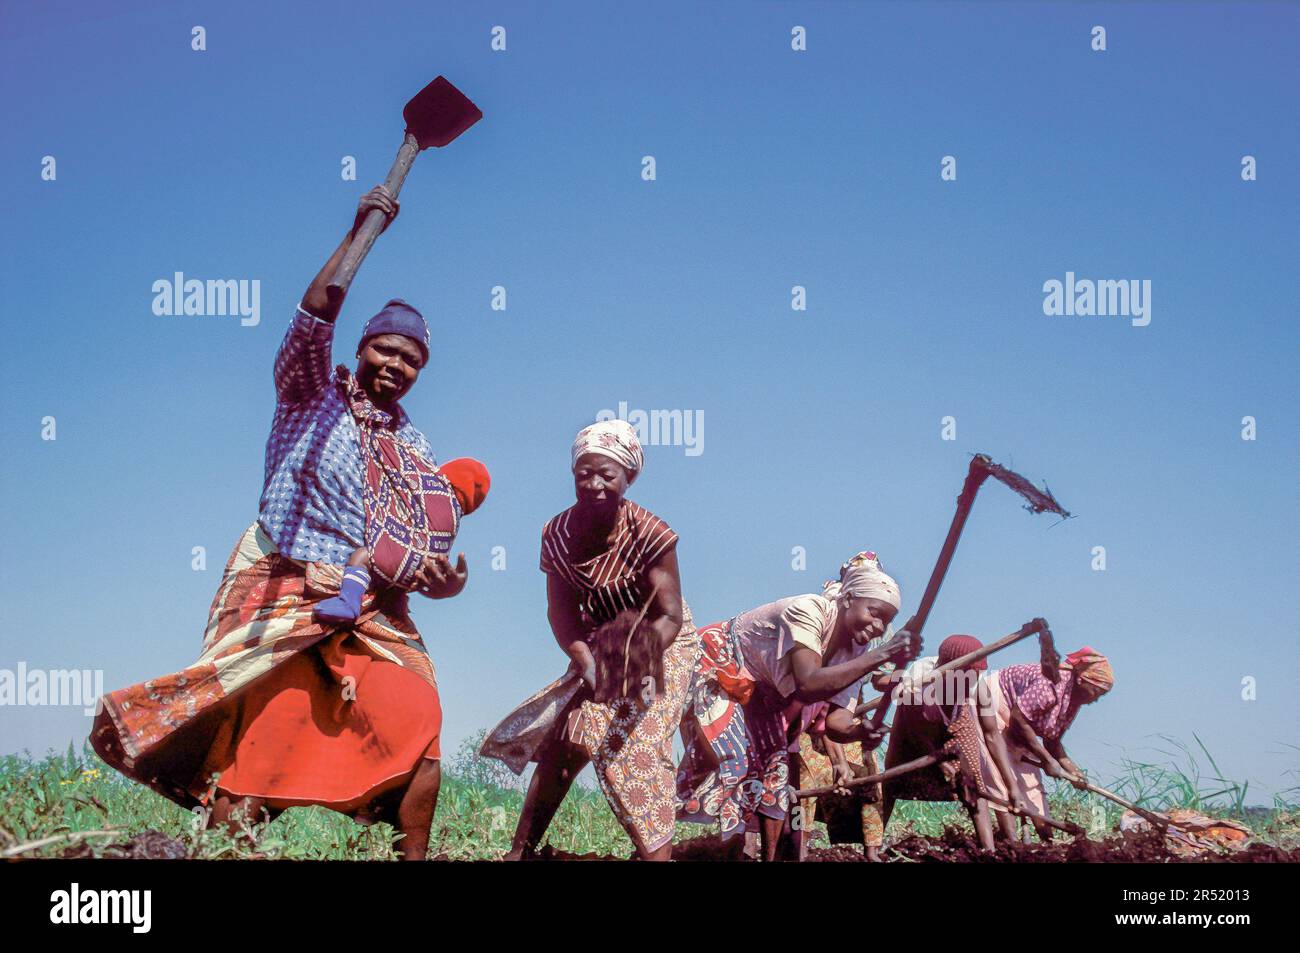 Mozambique, Maputo region; Women at work ploughing the soil of a field; one woman is carrying a baby in a cloth. Stock Photo